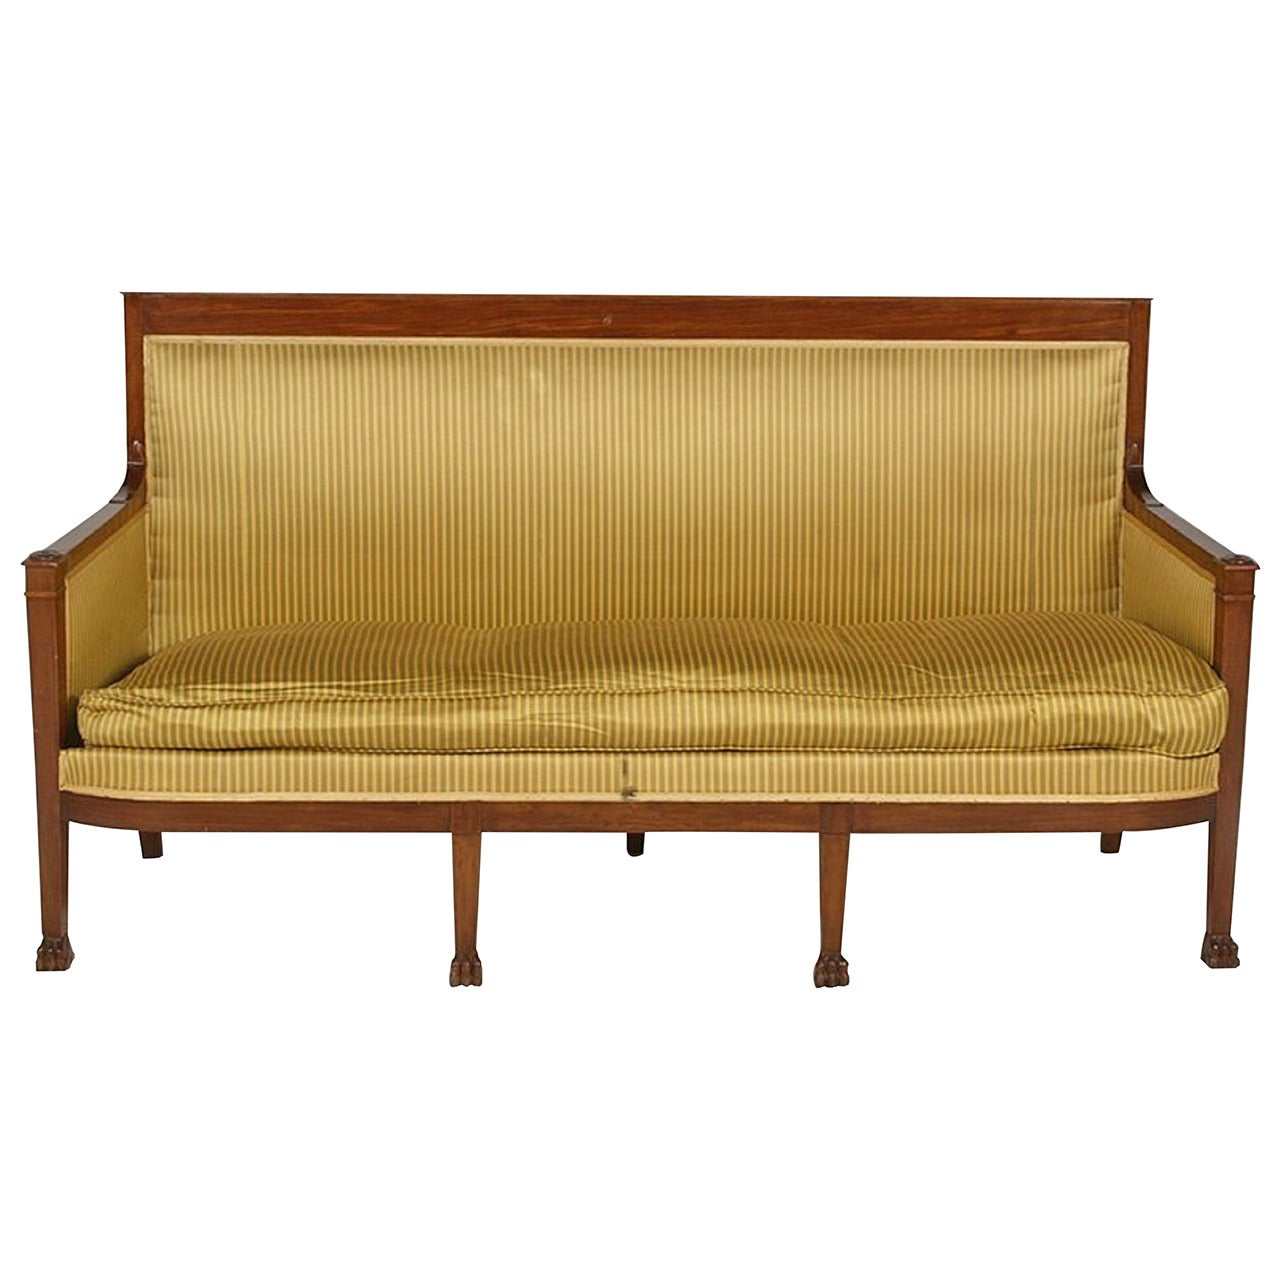 Directoire Style Upholstered Sofa with Claw Feet, 19th Century